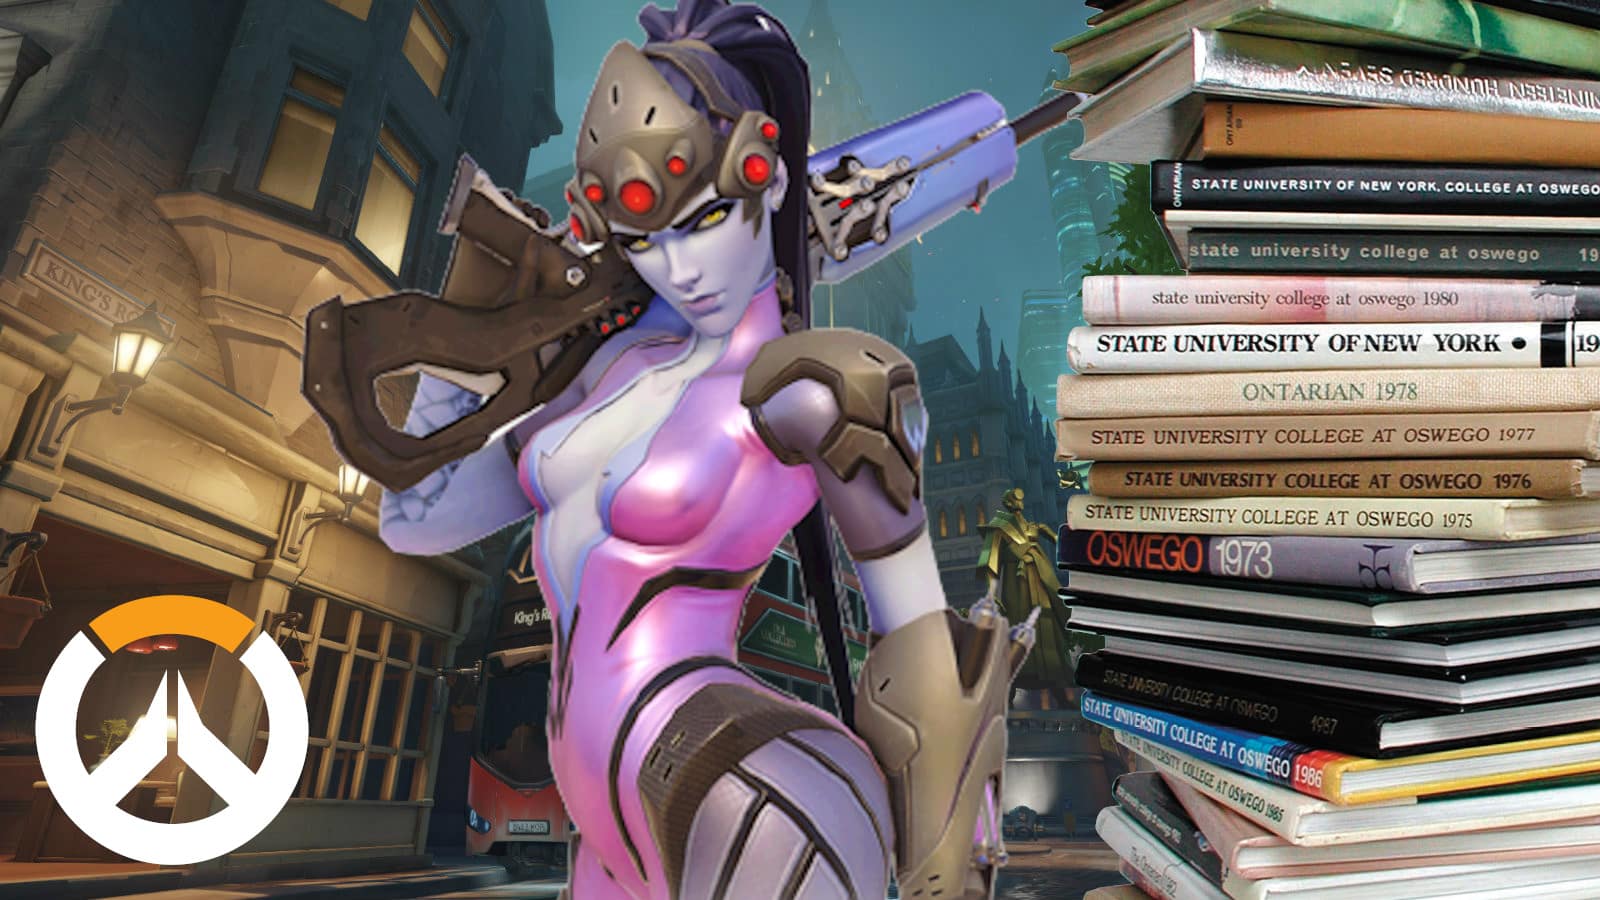 Widowmaker with a bunch of text books